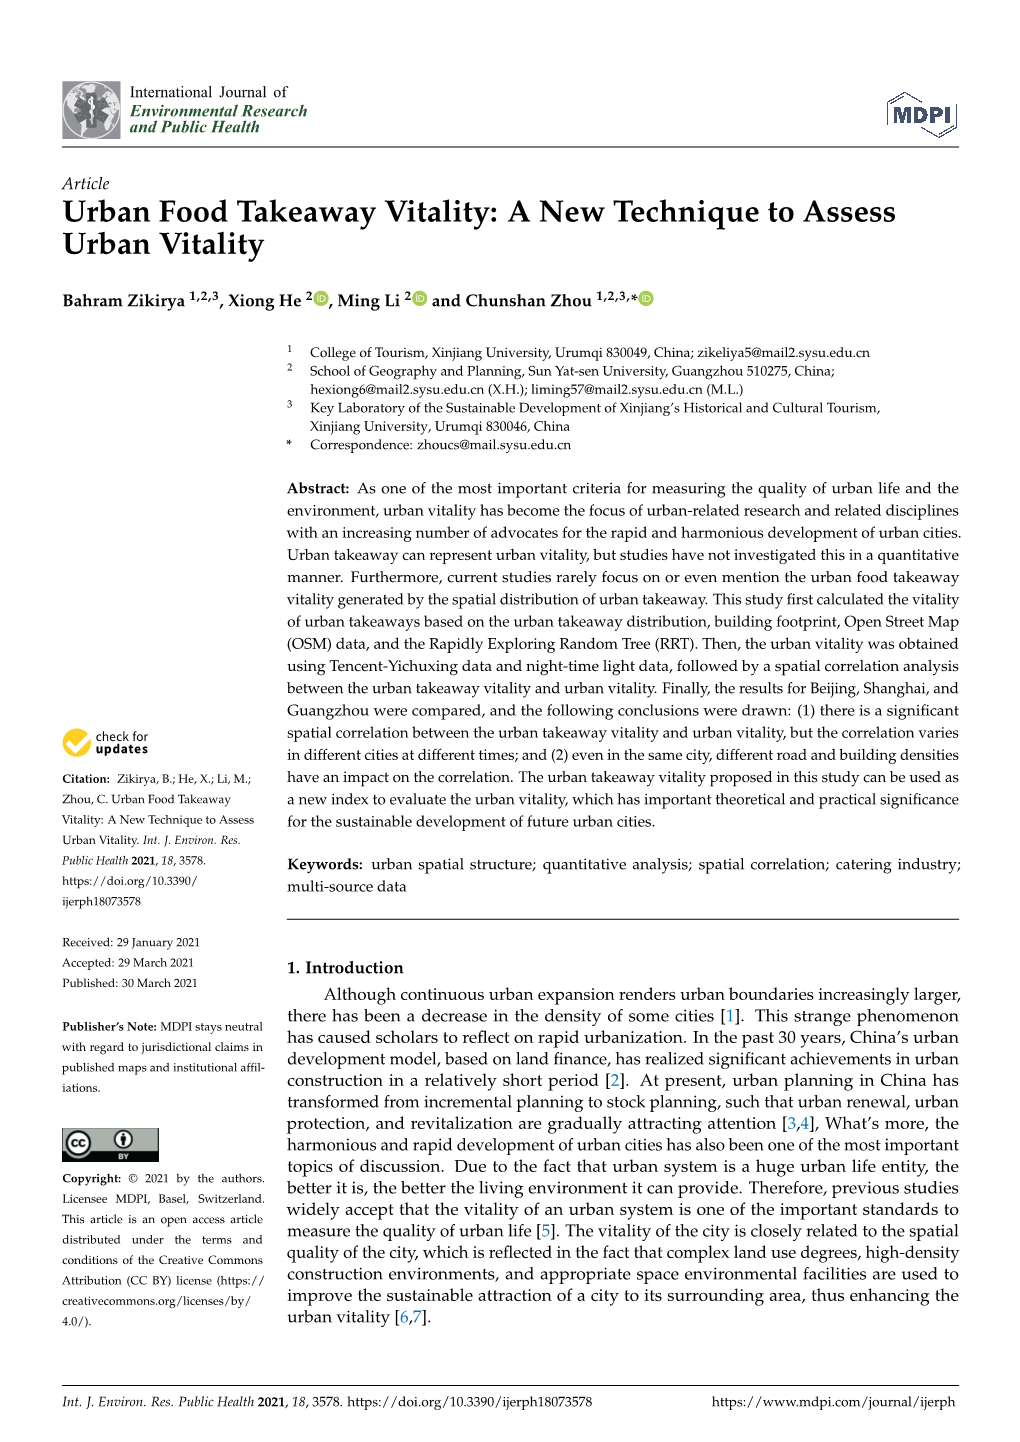 Urban Food Takeaway Vitality: a New Technique to Assess Urban Vitality